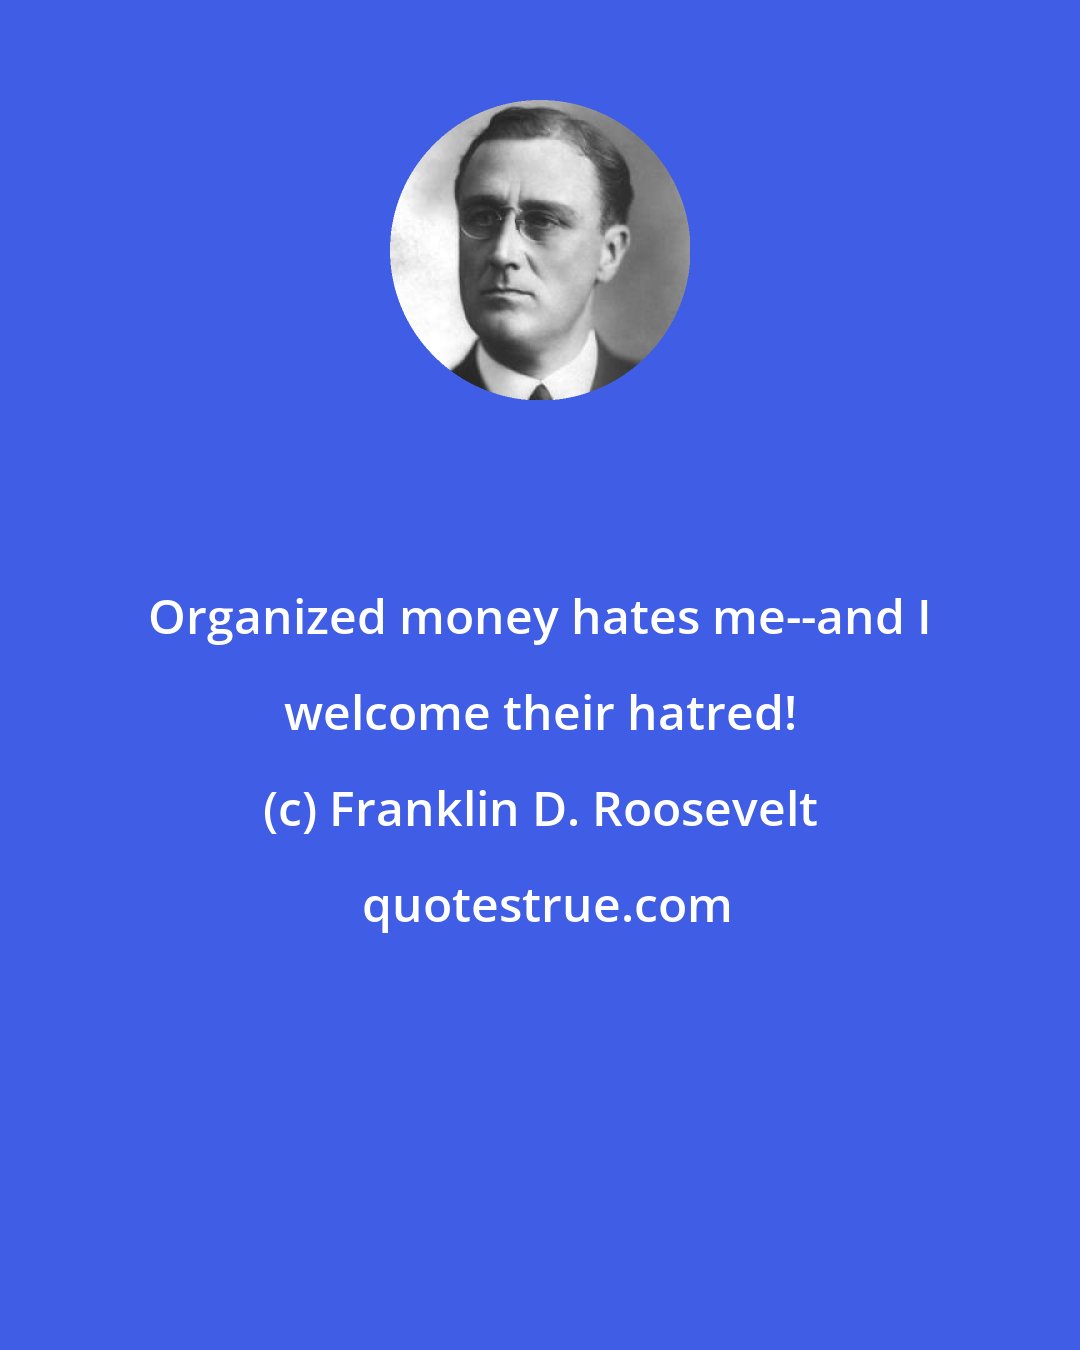 Franklin D. Roosevelt: Organized money hates me--and I welcome their hatred!